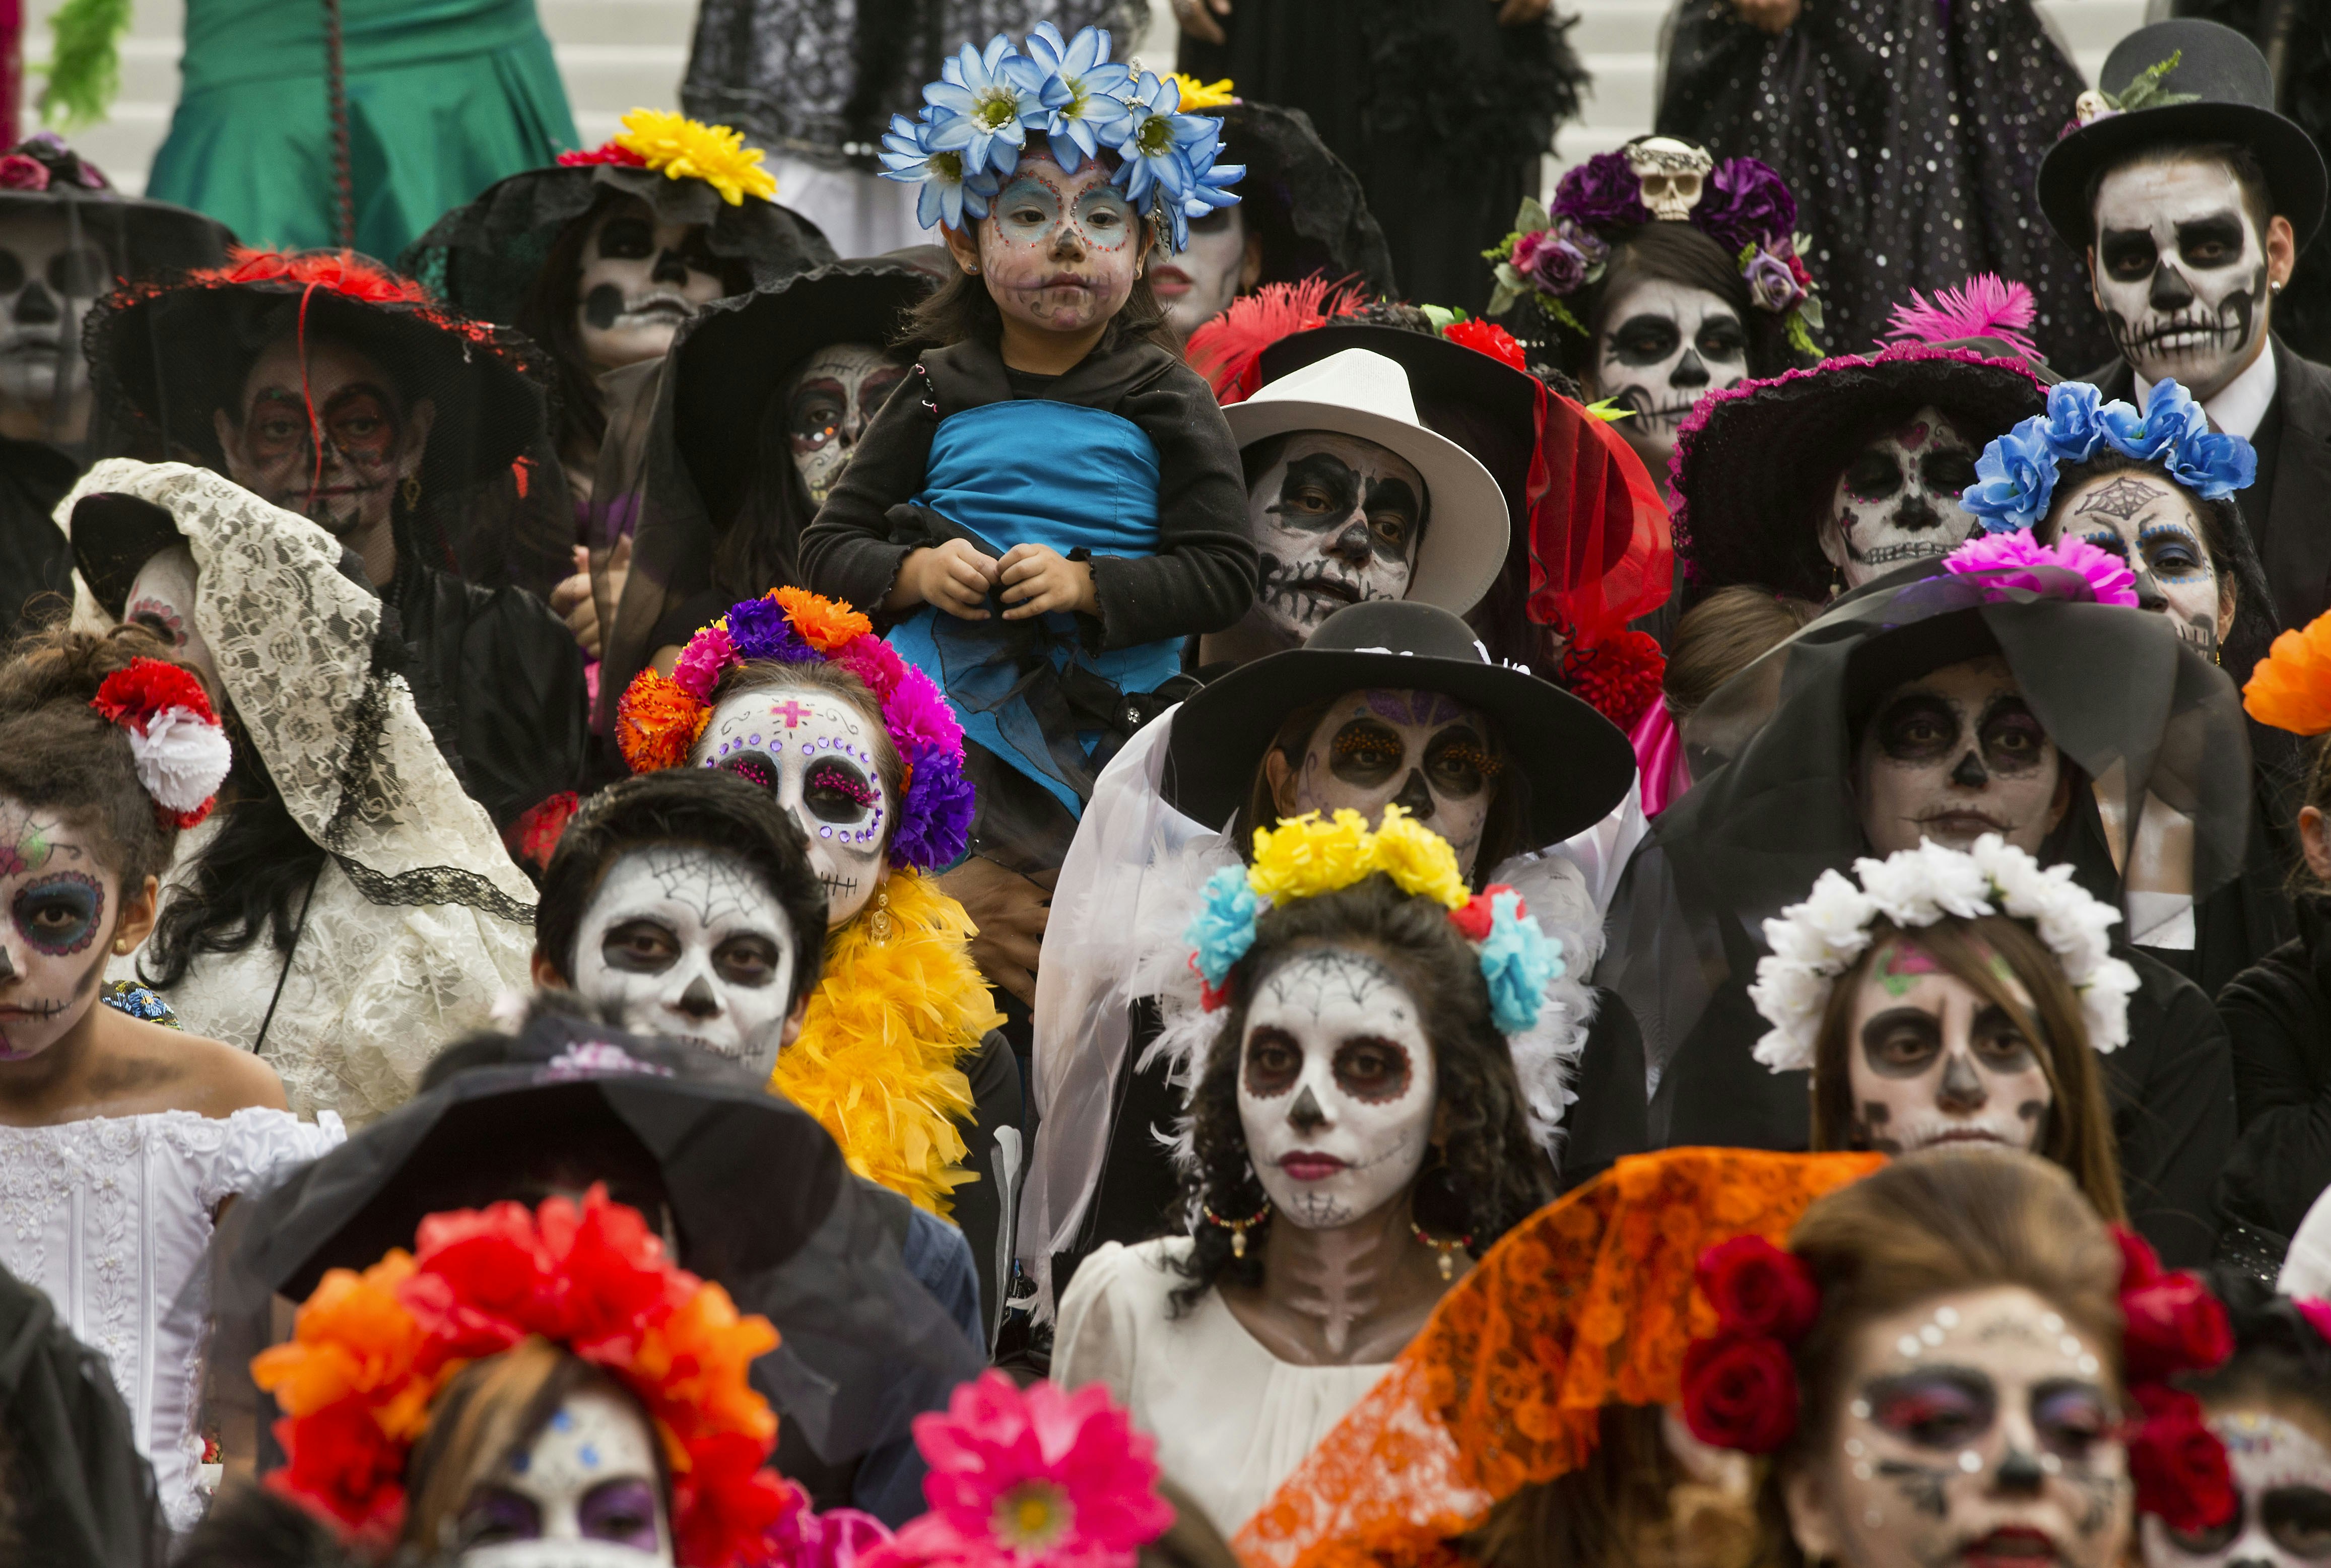 A girl in costume is held up during a Catrina Fest to commemorate Day of the Dead, a holiday that honors the deceased, in Mexico City, Sunday, Nov. 1, 2015.